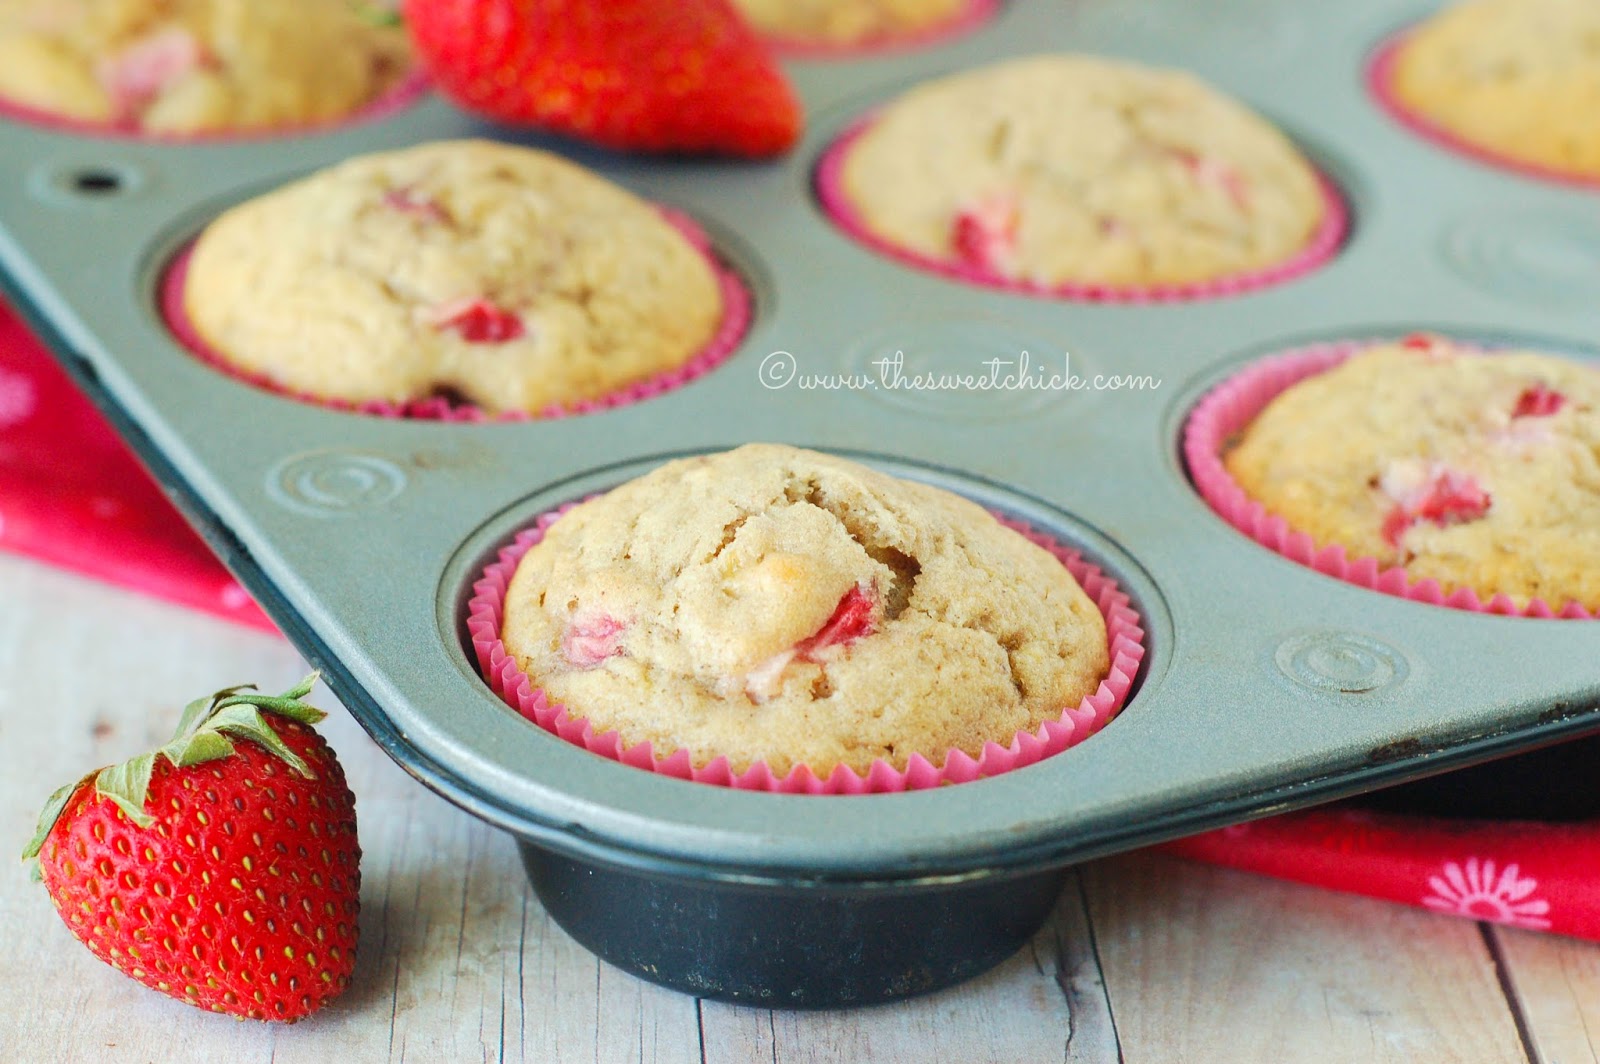 Strawberry Coconut Banana Muffins @www.thesweetchick.com